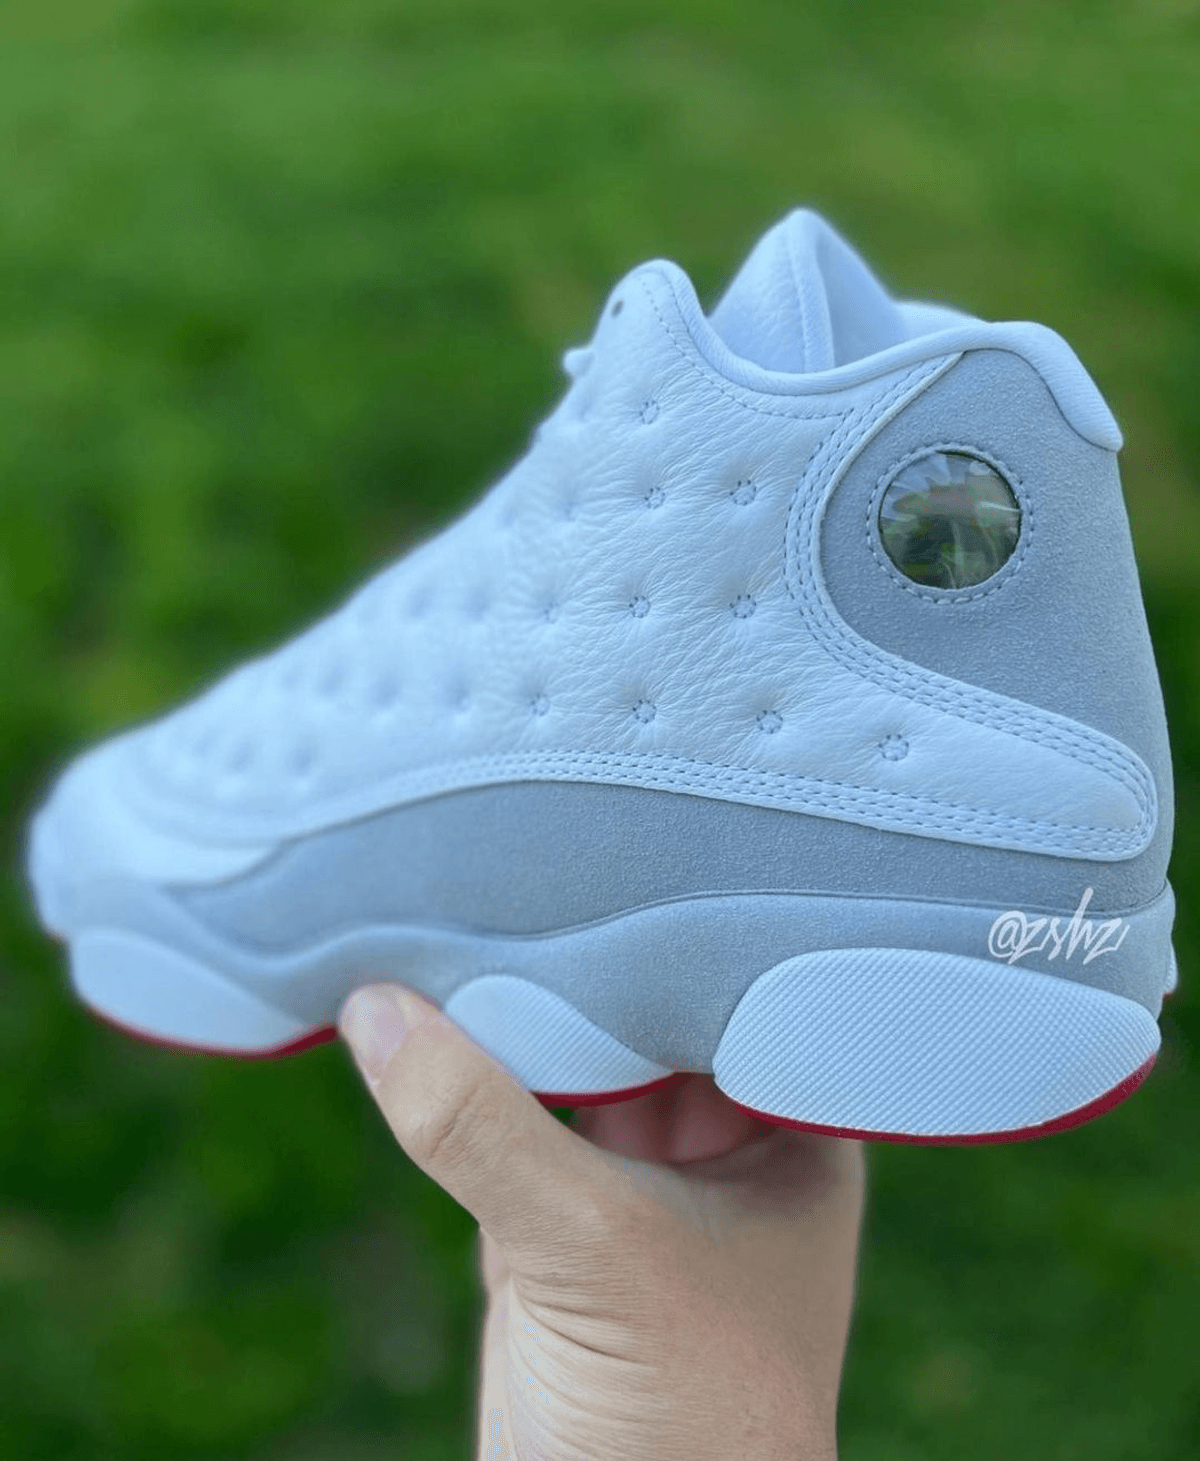 Air Jordan 13 Wolf Is Grey Ready To Drop Just In Time For Summer